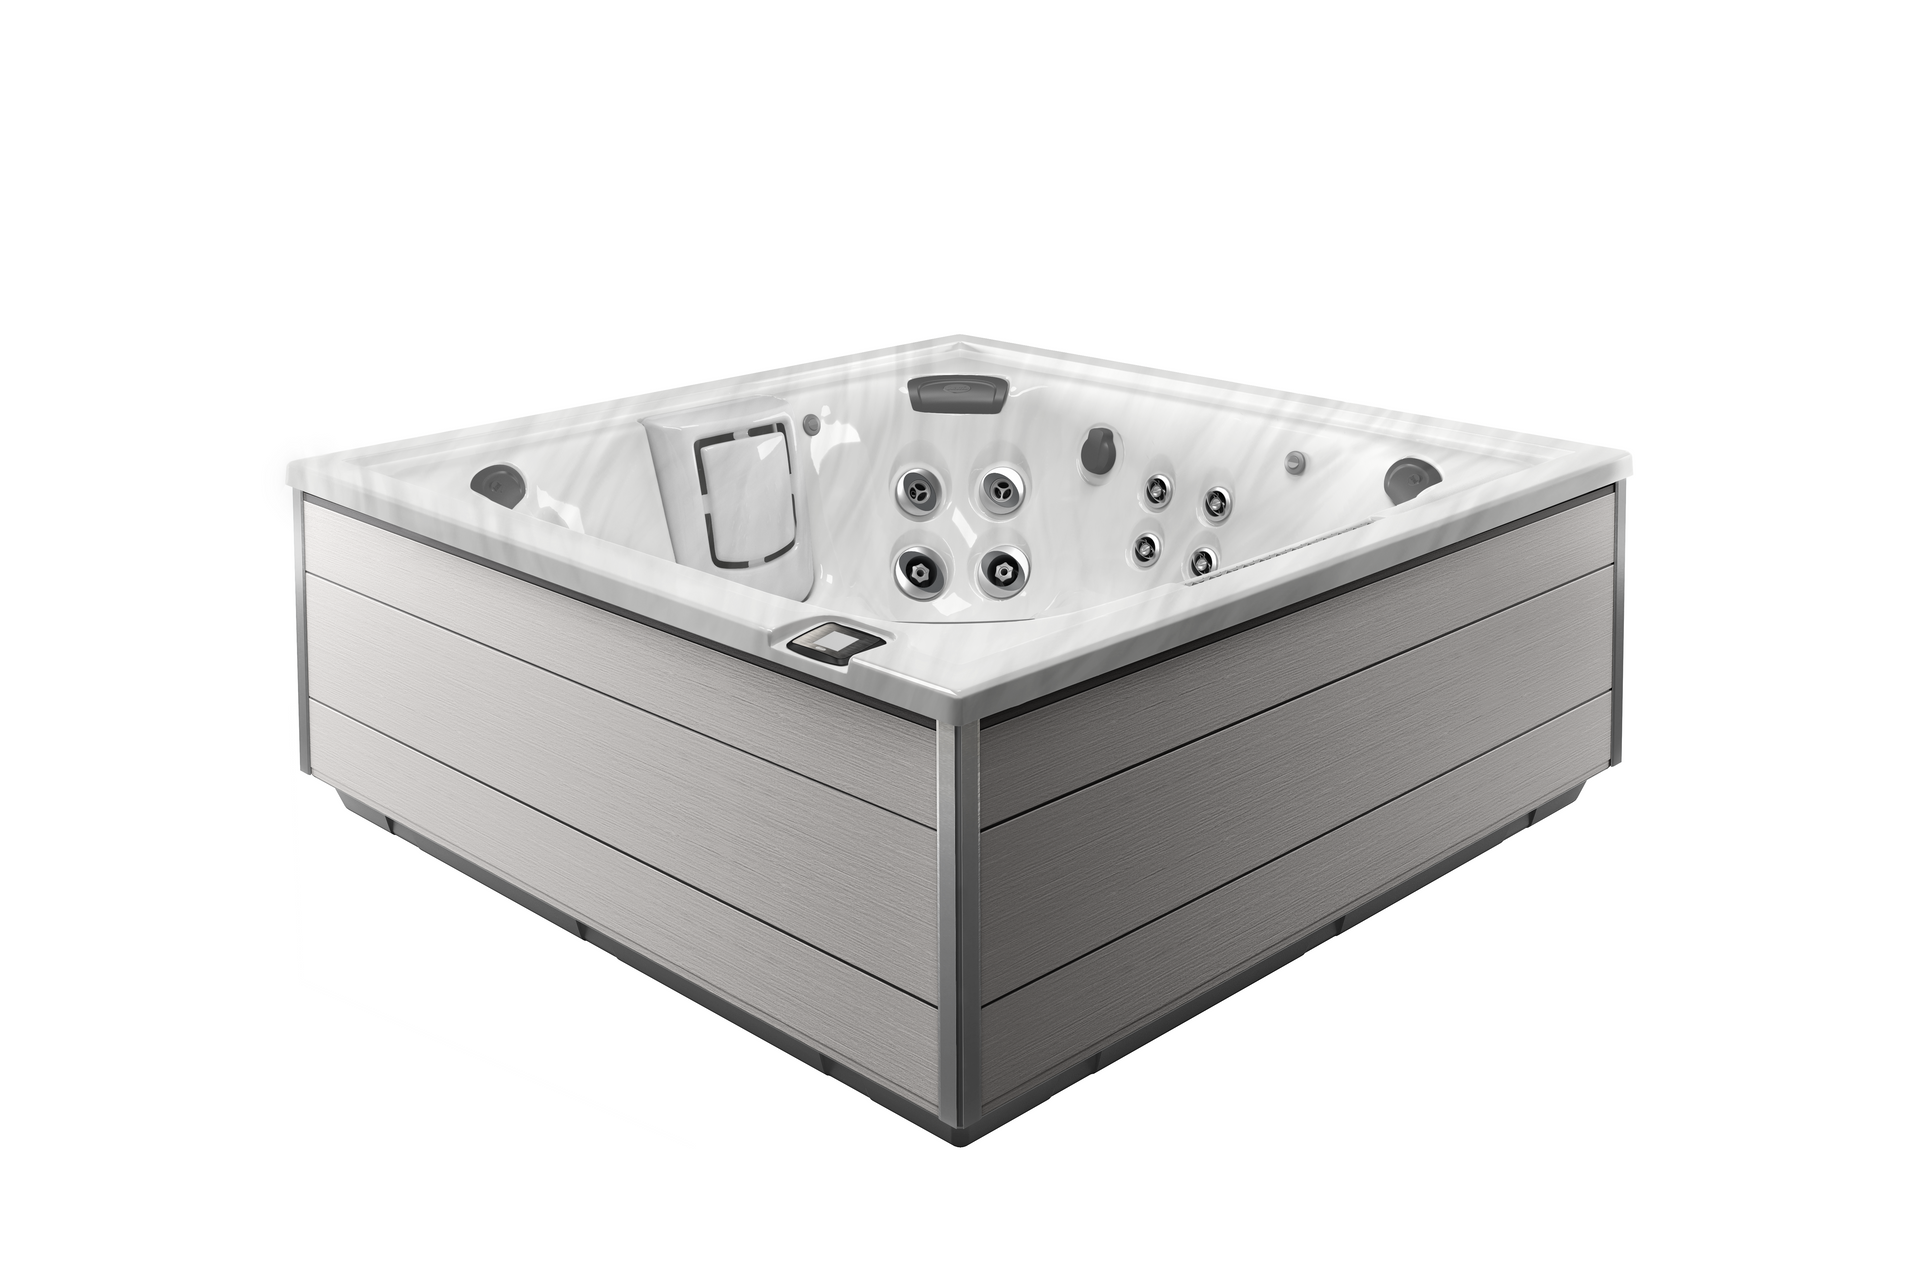 The J-LX By Jacuzzi Combines Wellness, Health & Spa Amenities